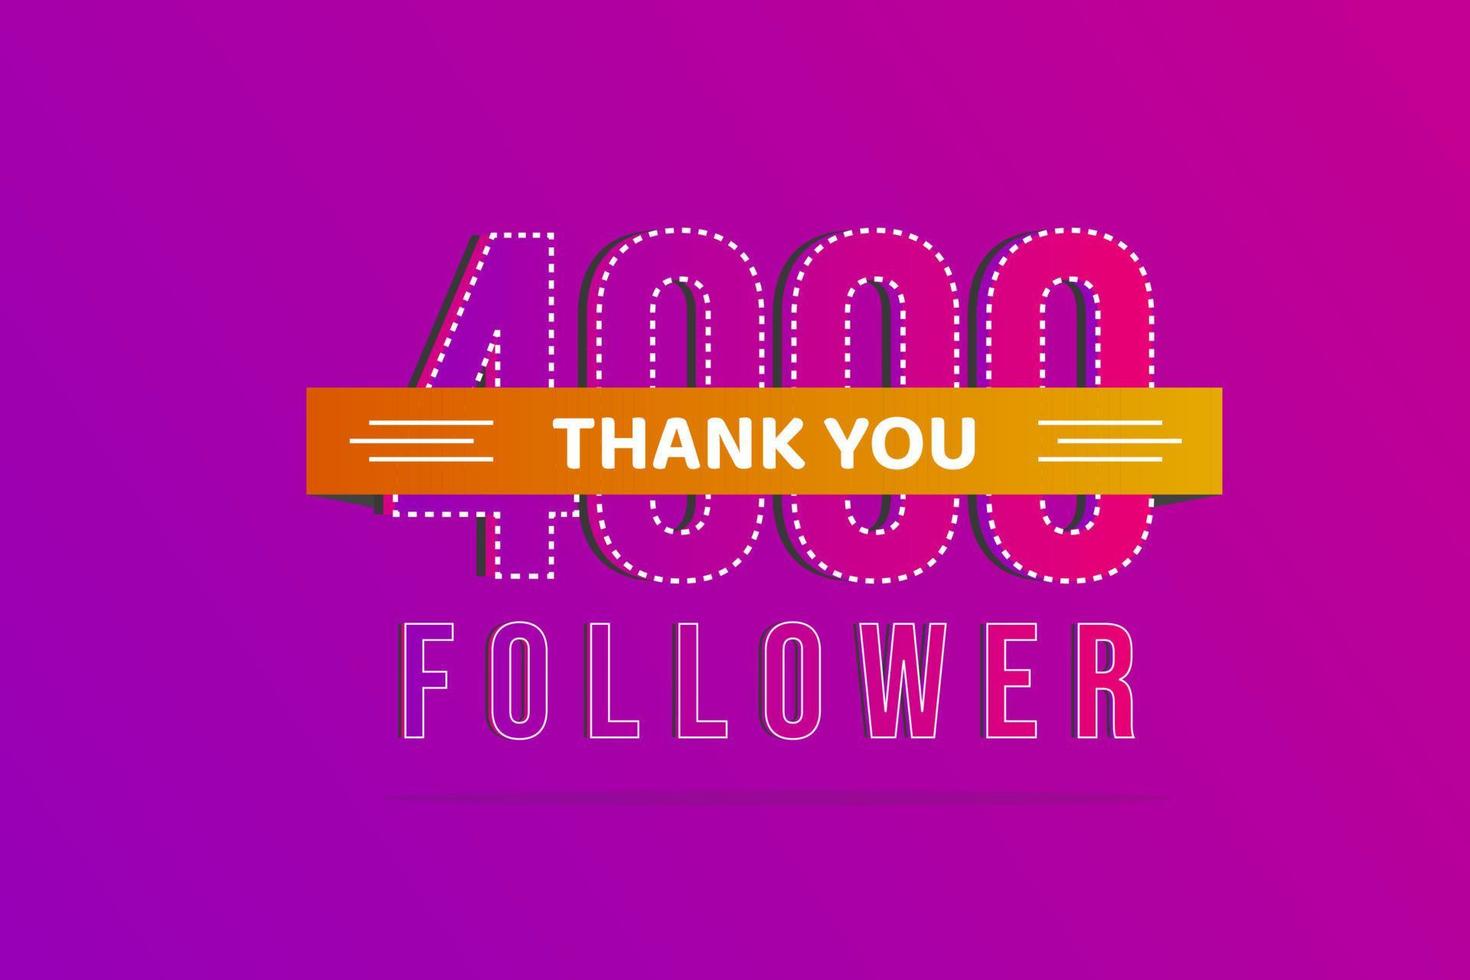 Thank you 4000 followers thank you banner.First 4K followers congratulation card with numbers vector